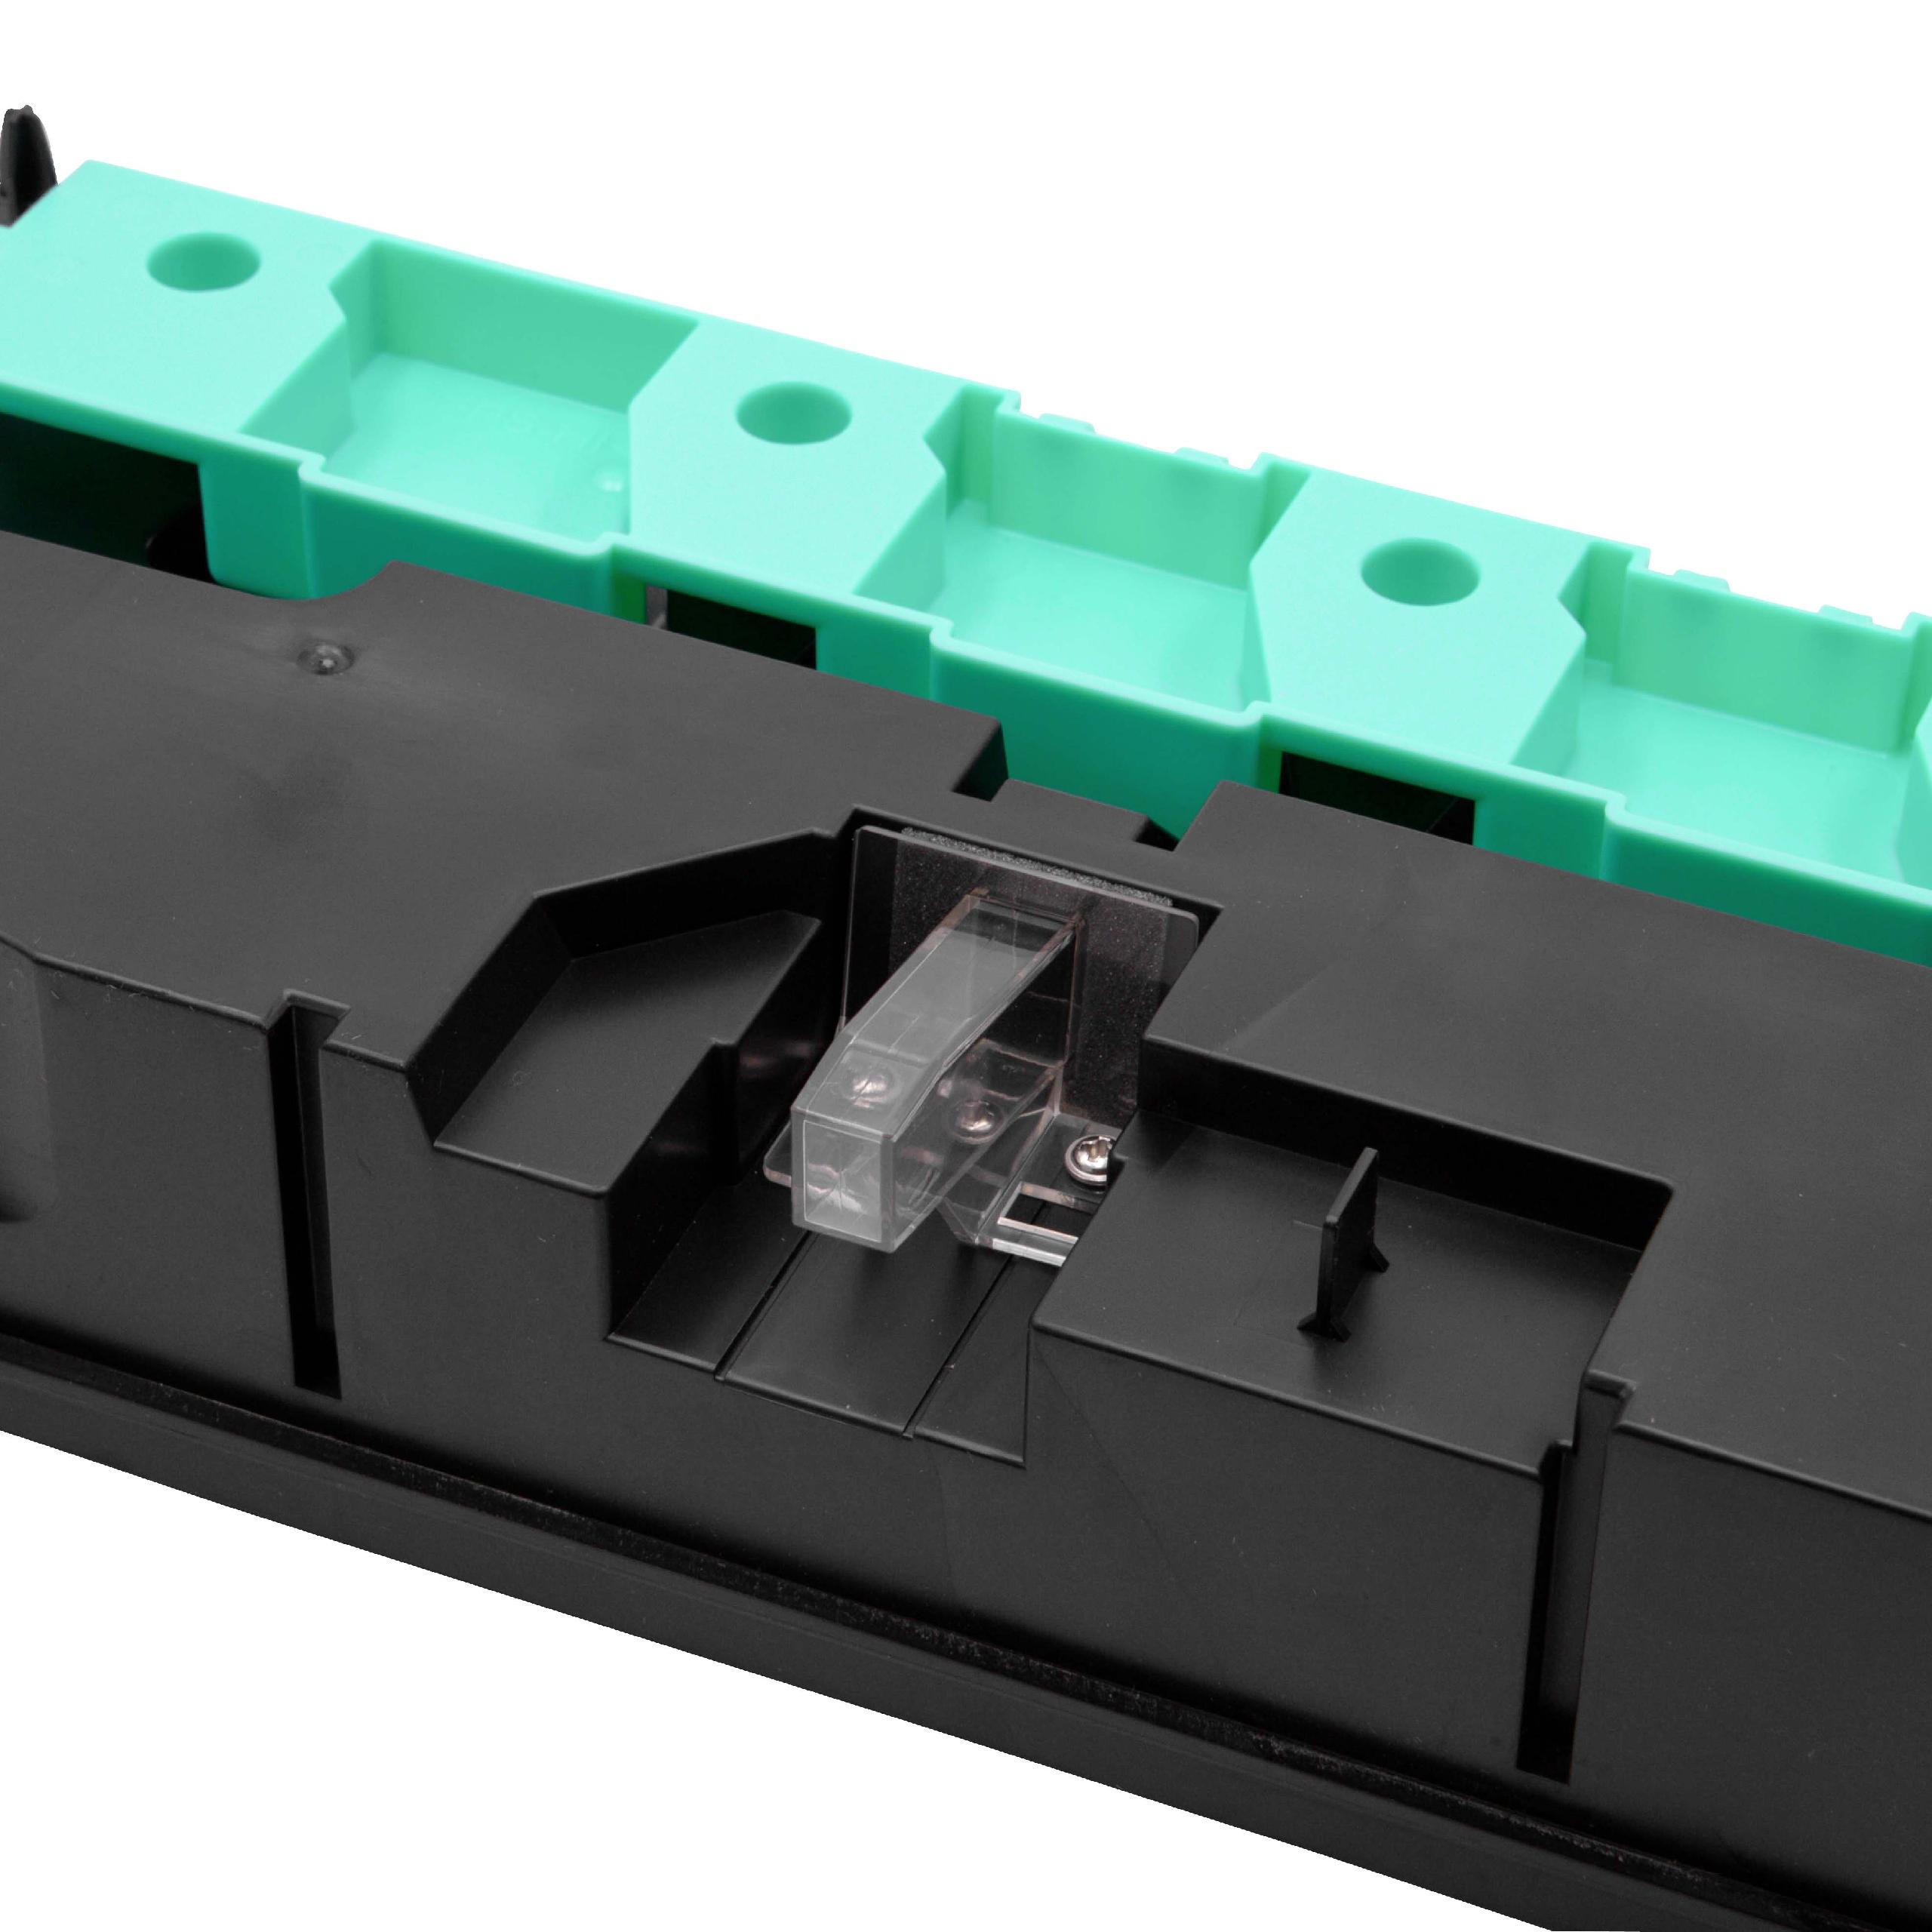 Waste Toner Container as Replacement for Konica Minolta WX-105, A8JJ-WY1 - Black